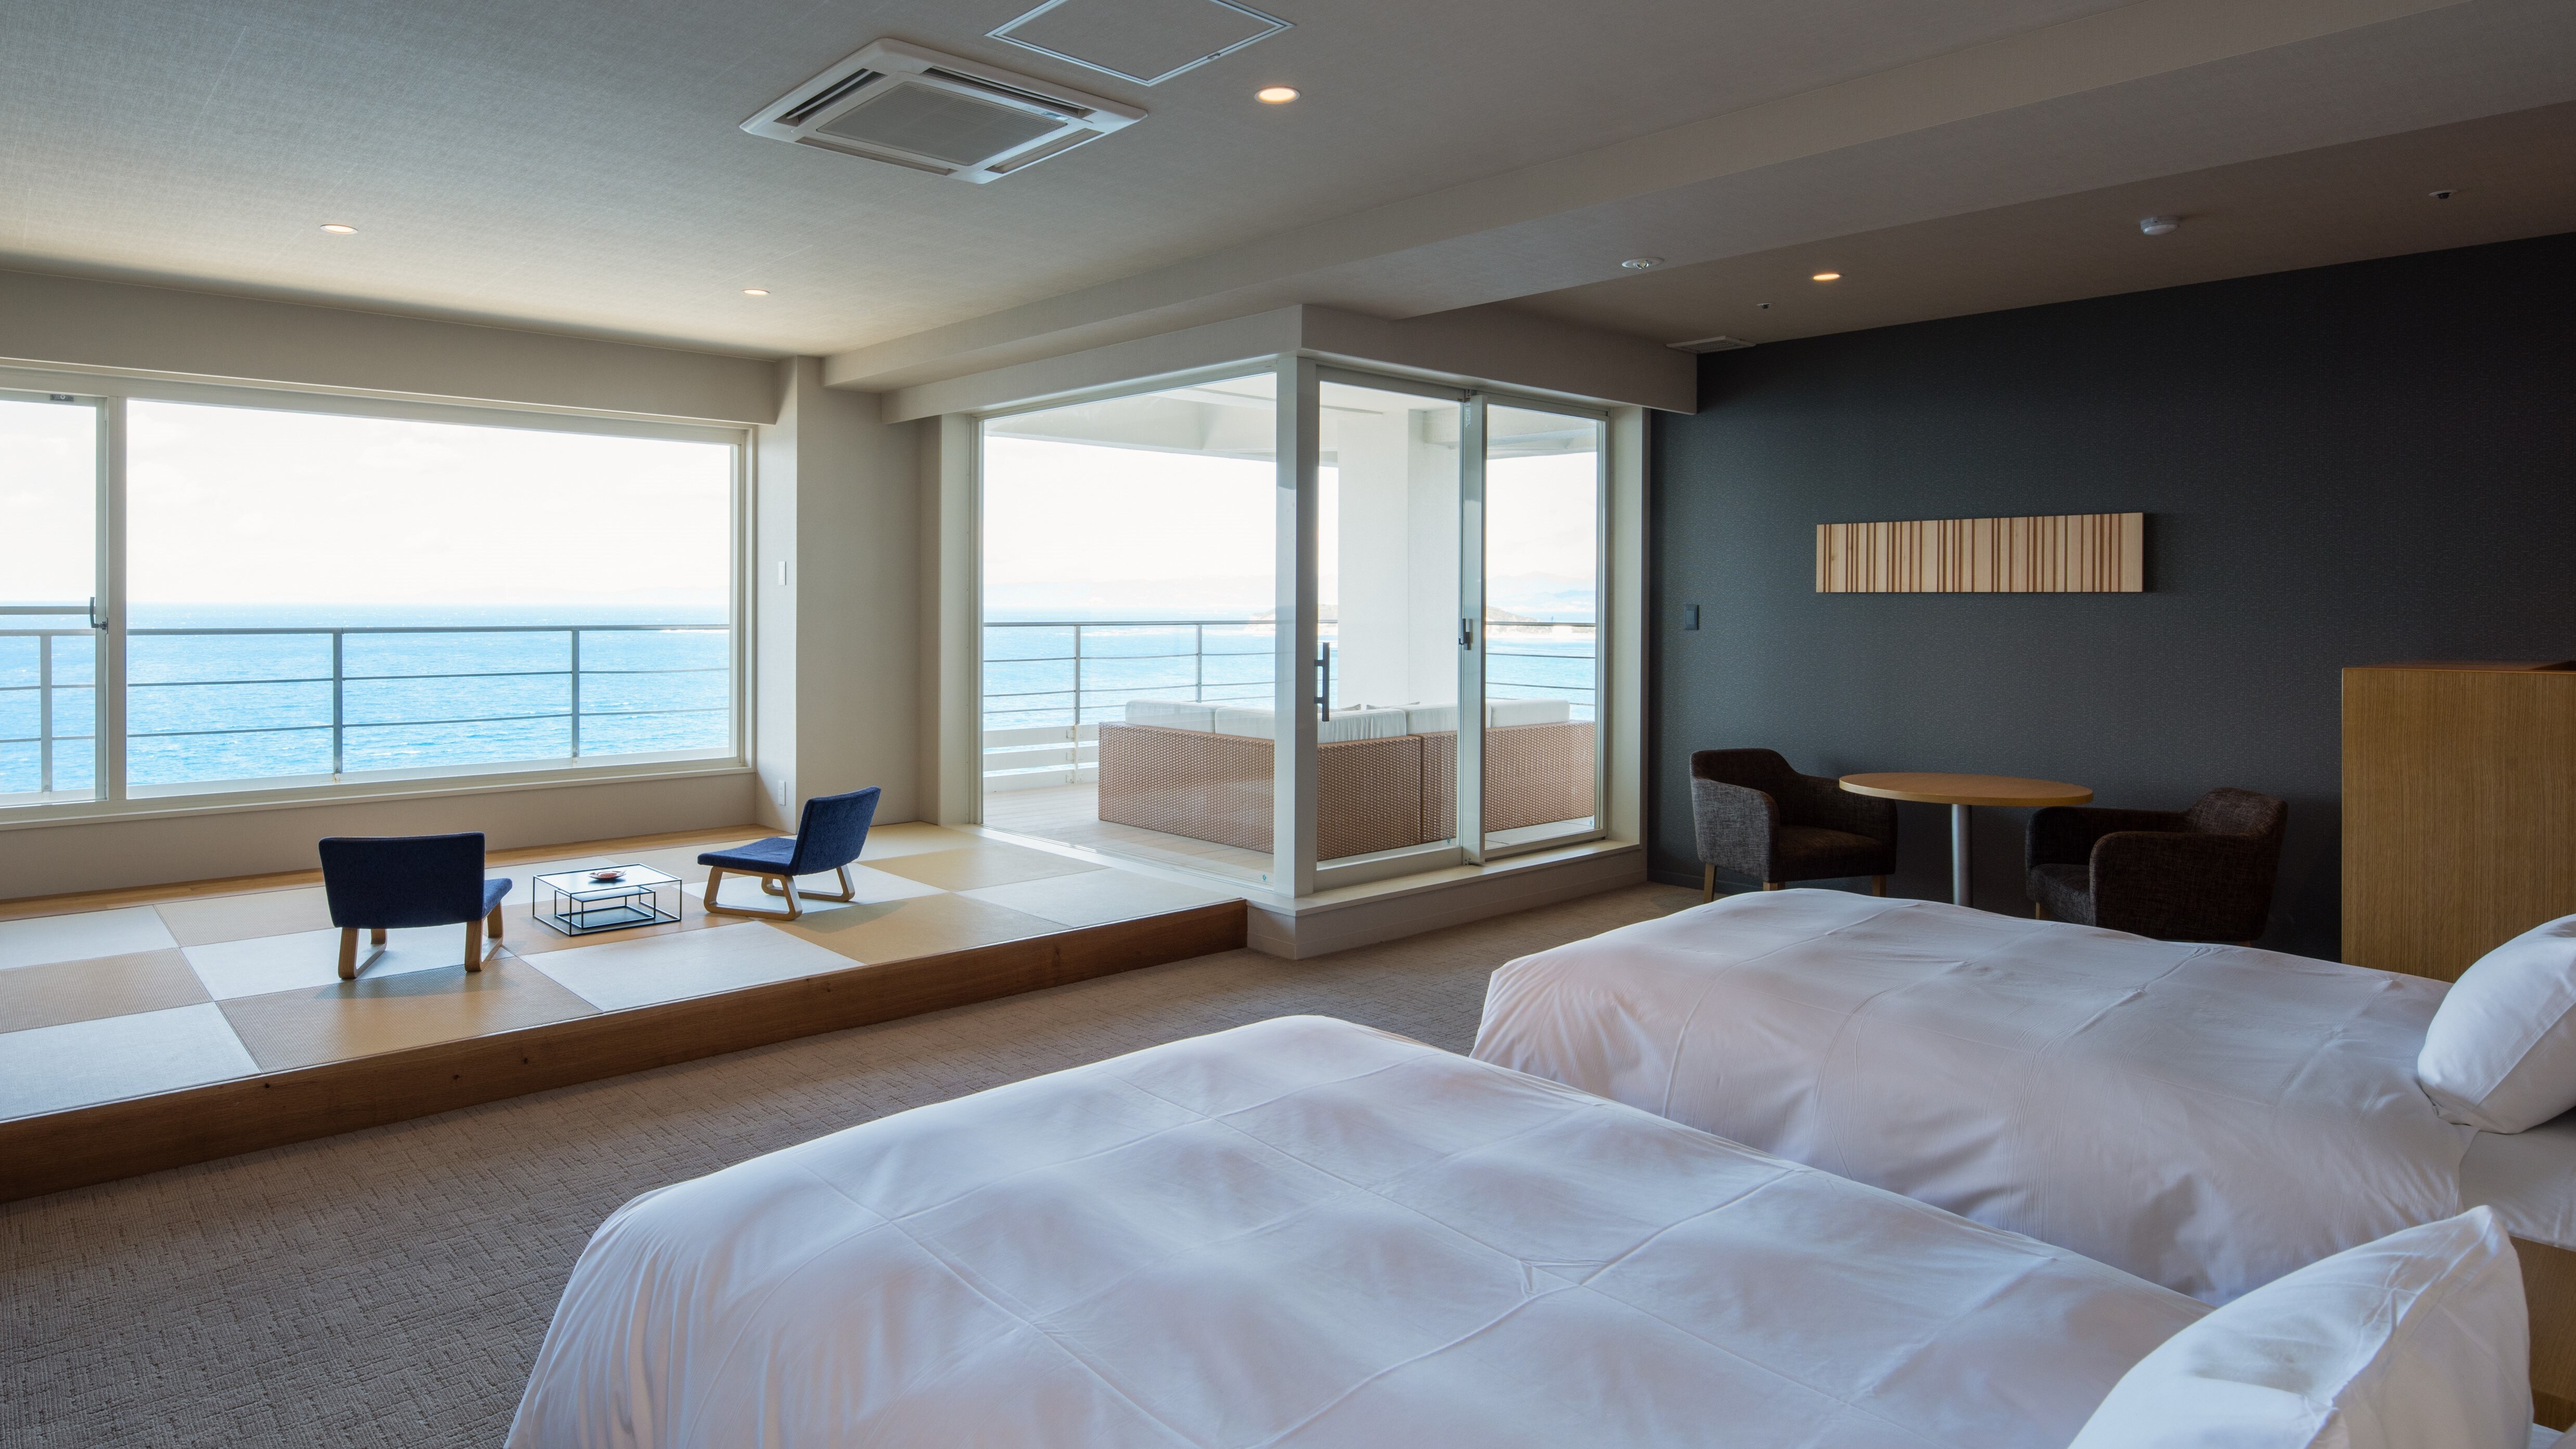 [Room] [Suite room / Overlooking the sea] Renovated / 80㎡ / Up to 4 people / Non-smoking beach side